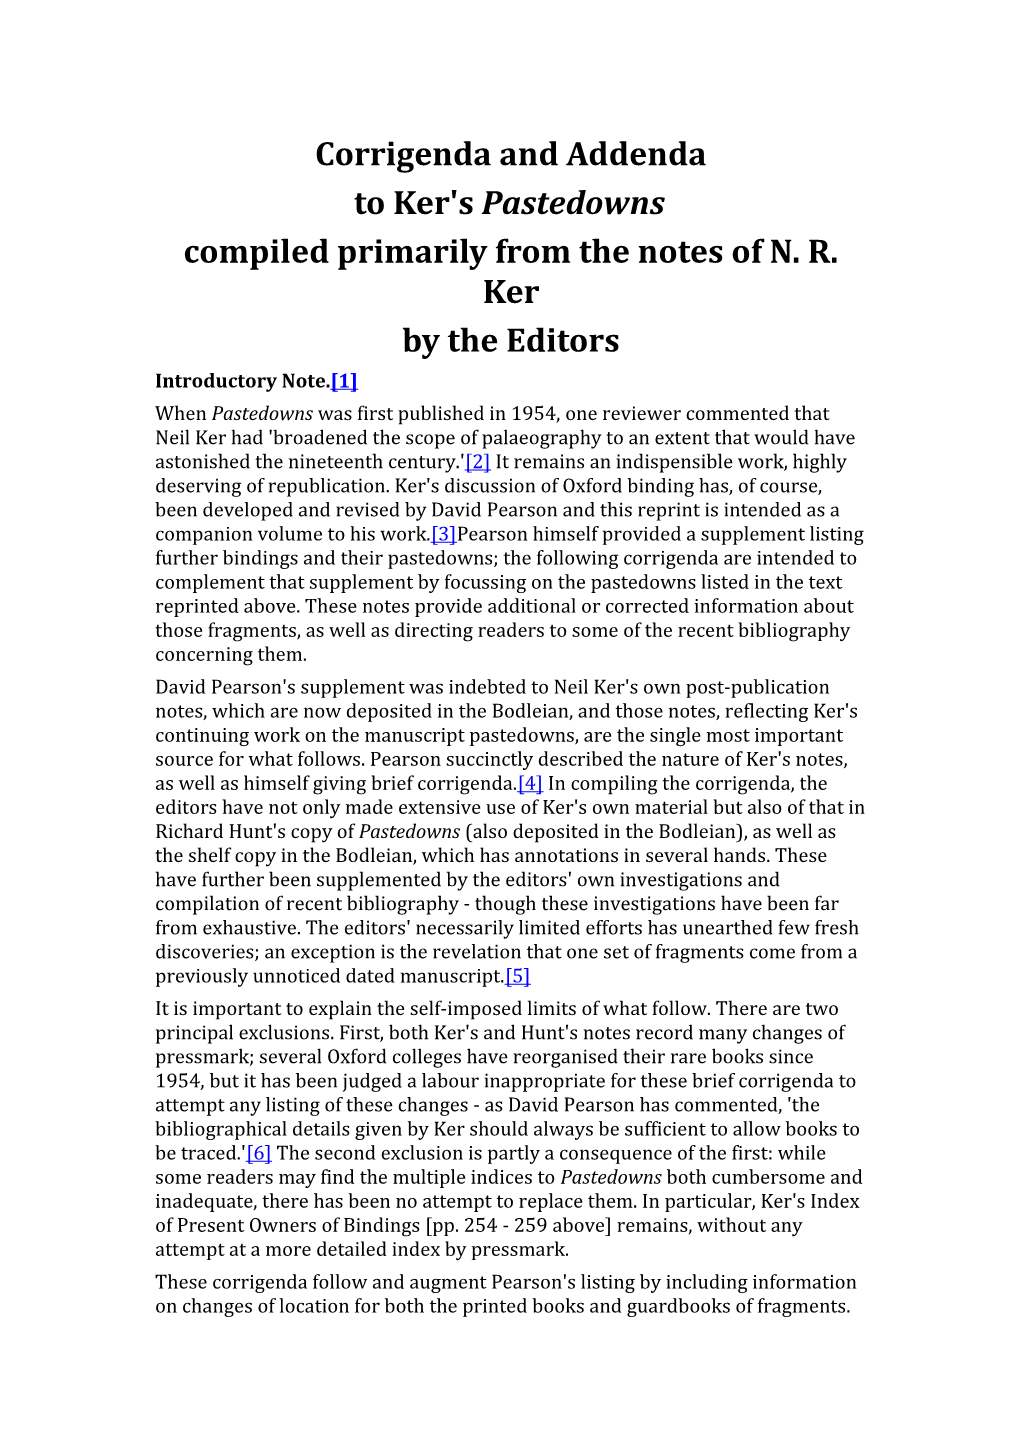 Compiled Primarily from the Notes of N. R. Ker